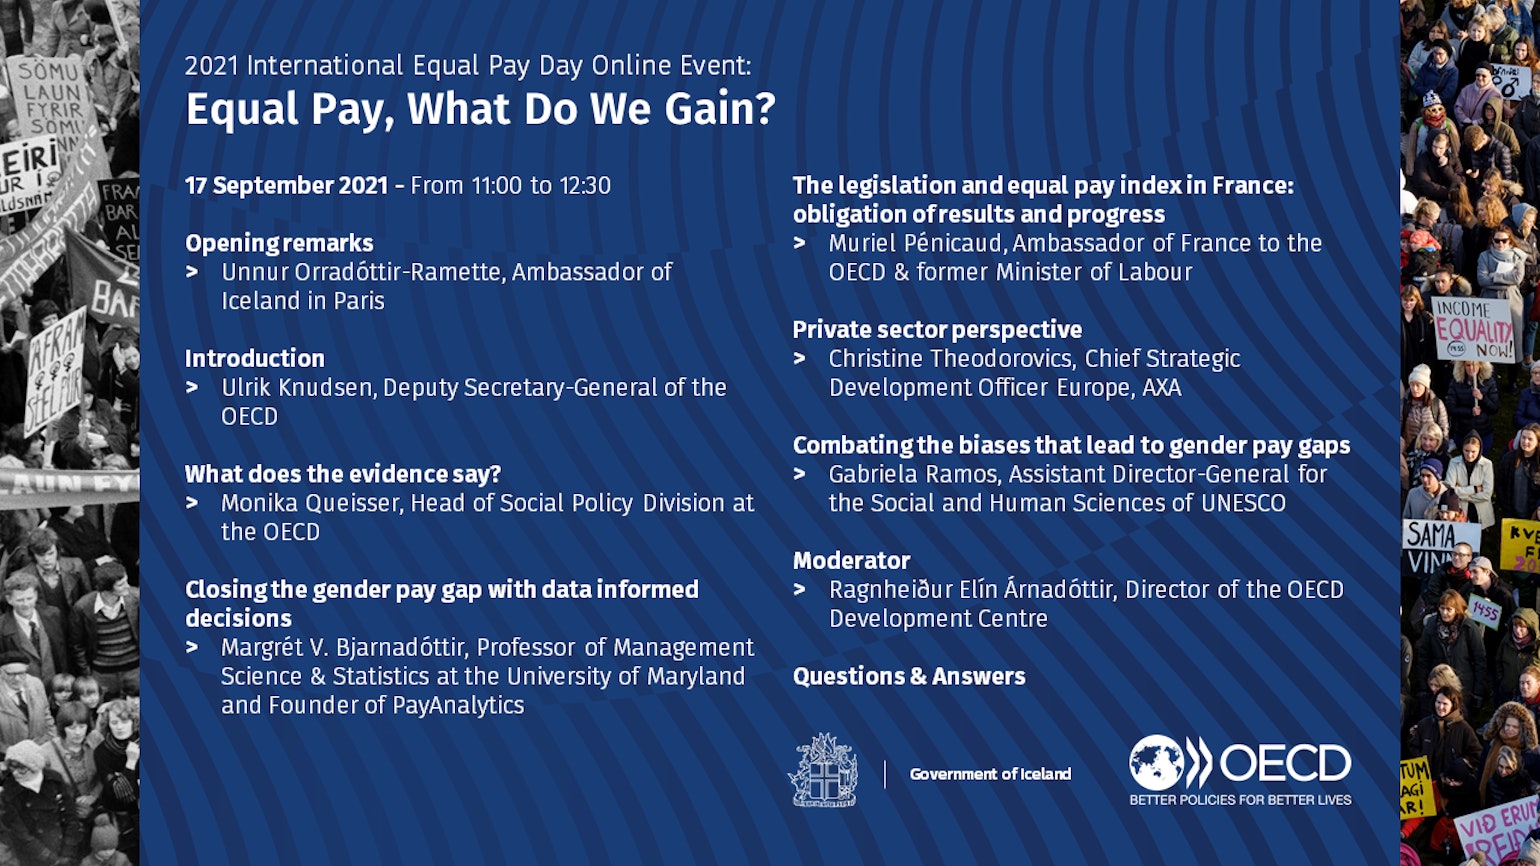 Full schedule - 2021 International Equal Pay Day Online Event: Equal Pay, What Do We Gain?